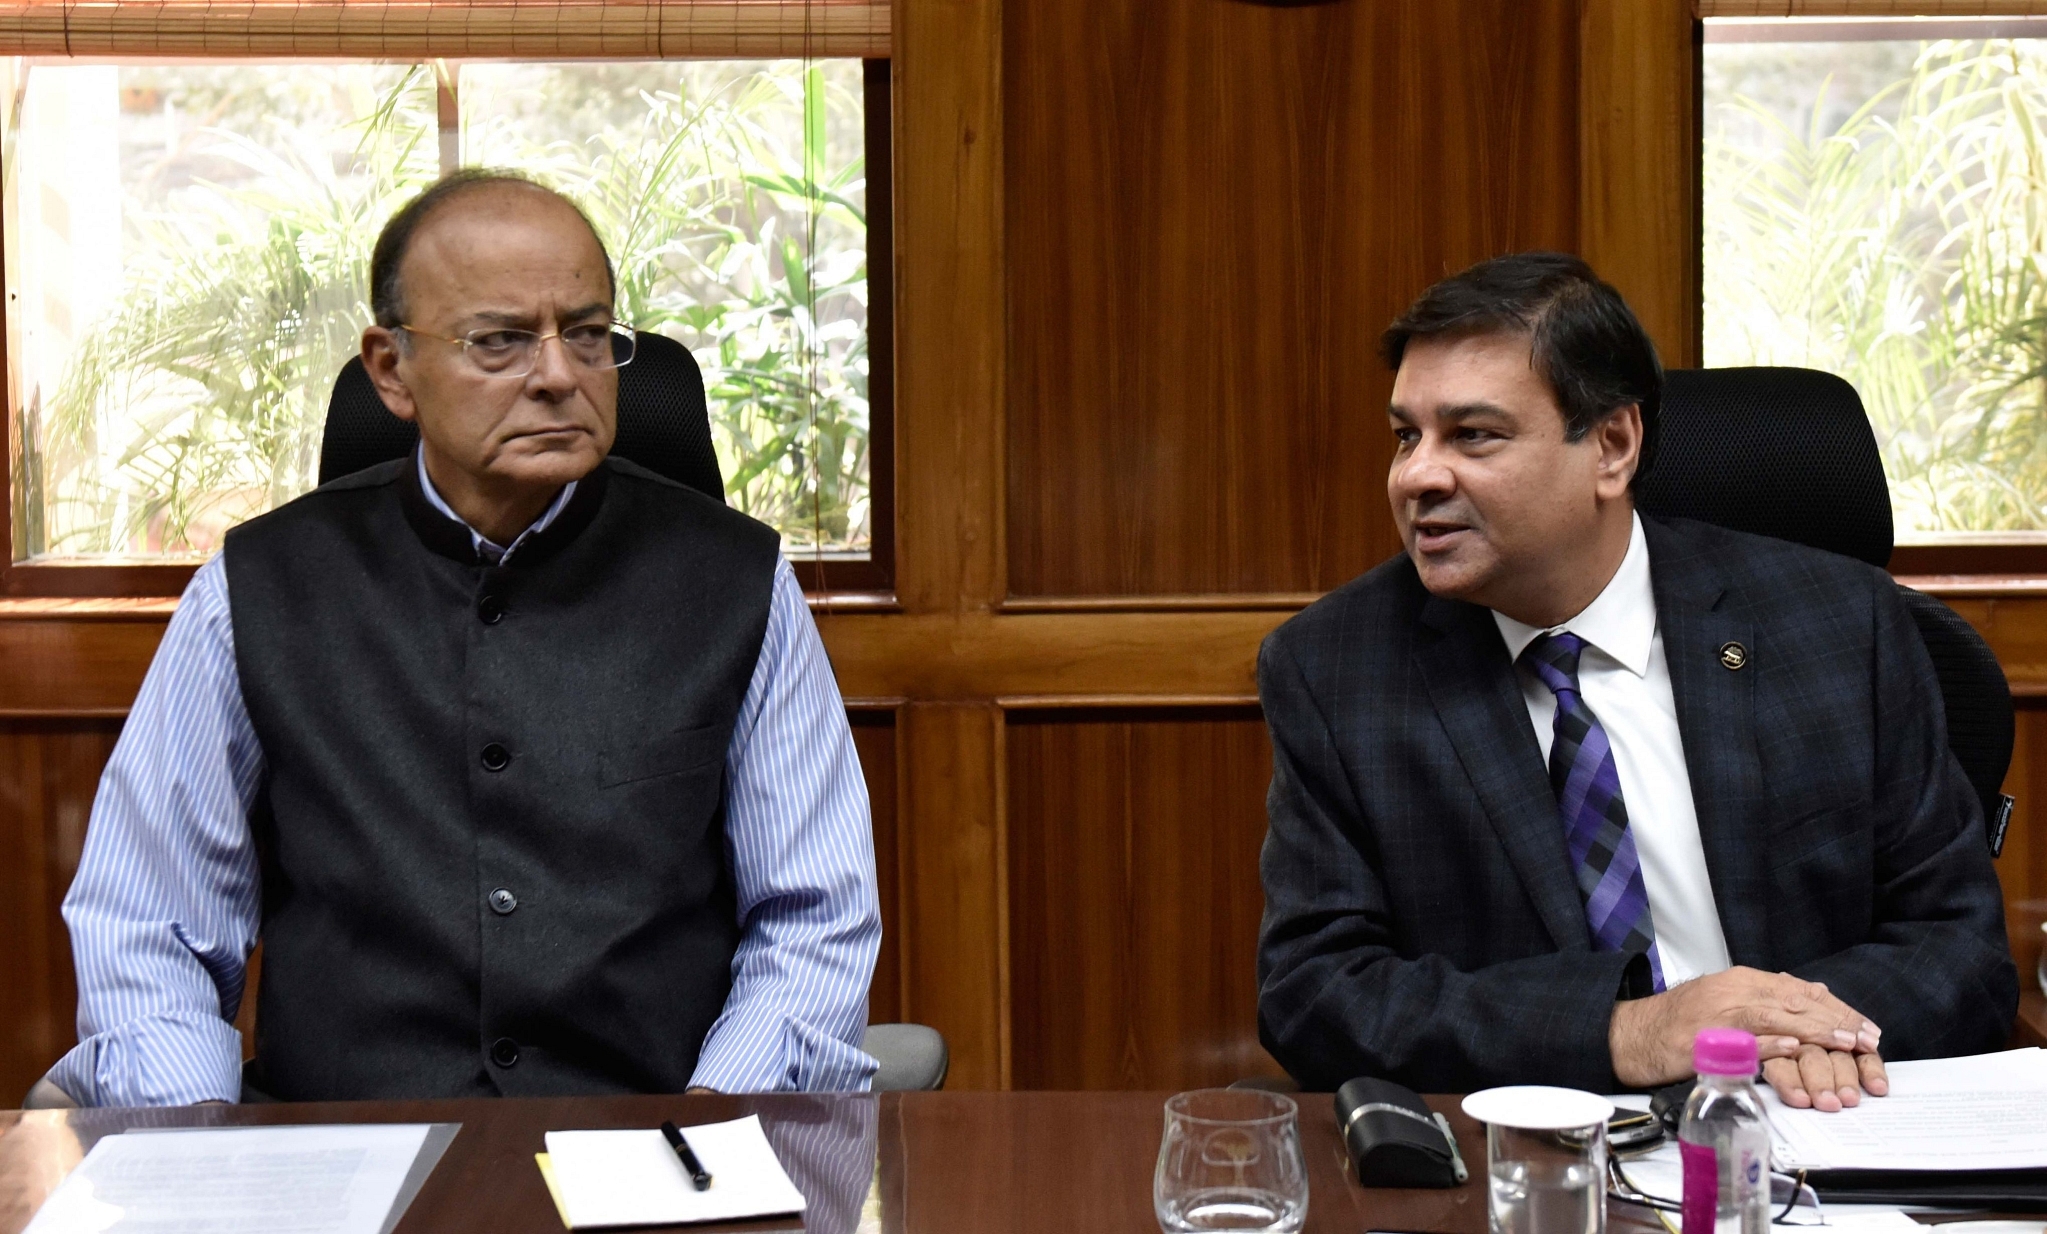 Finance Minister Arun Jaitley and RBI Governor Urjit Patel at 569th Central Board Meeting in New Delhi. (Mohd Zakir/Hindustan Times via Getty Images)&nbsp;